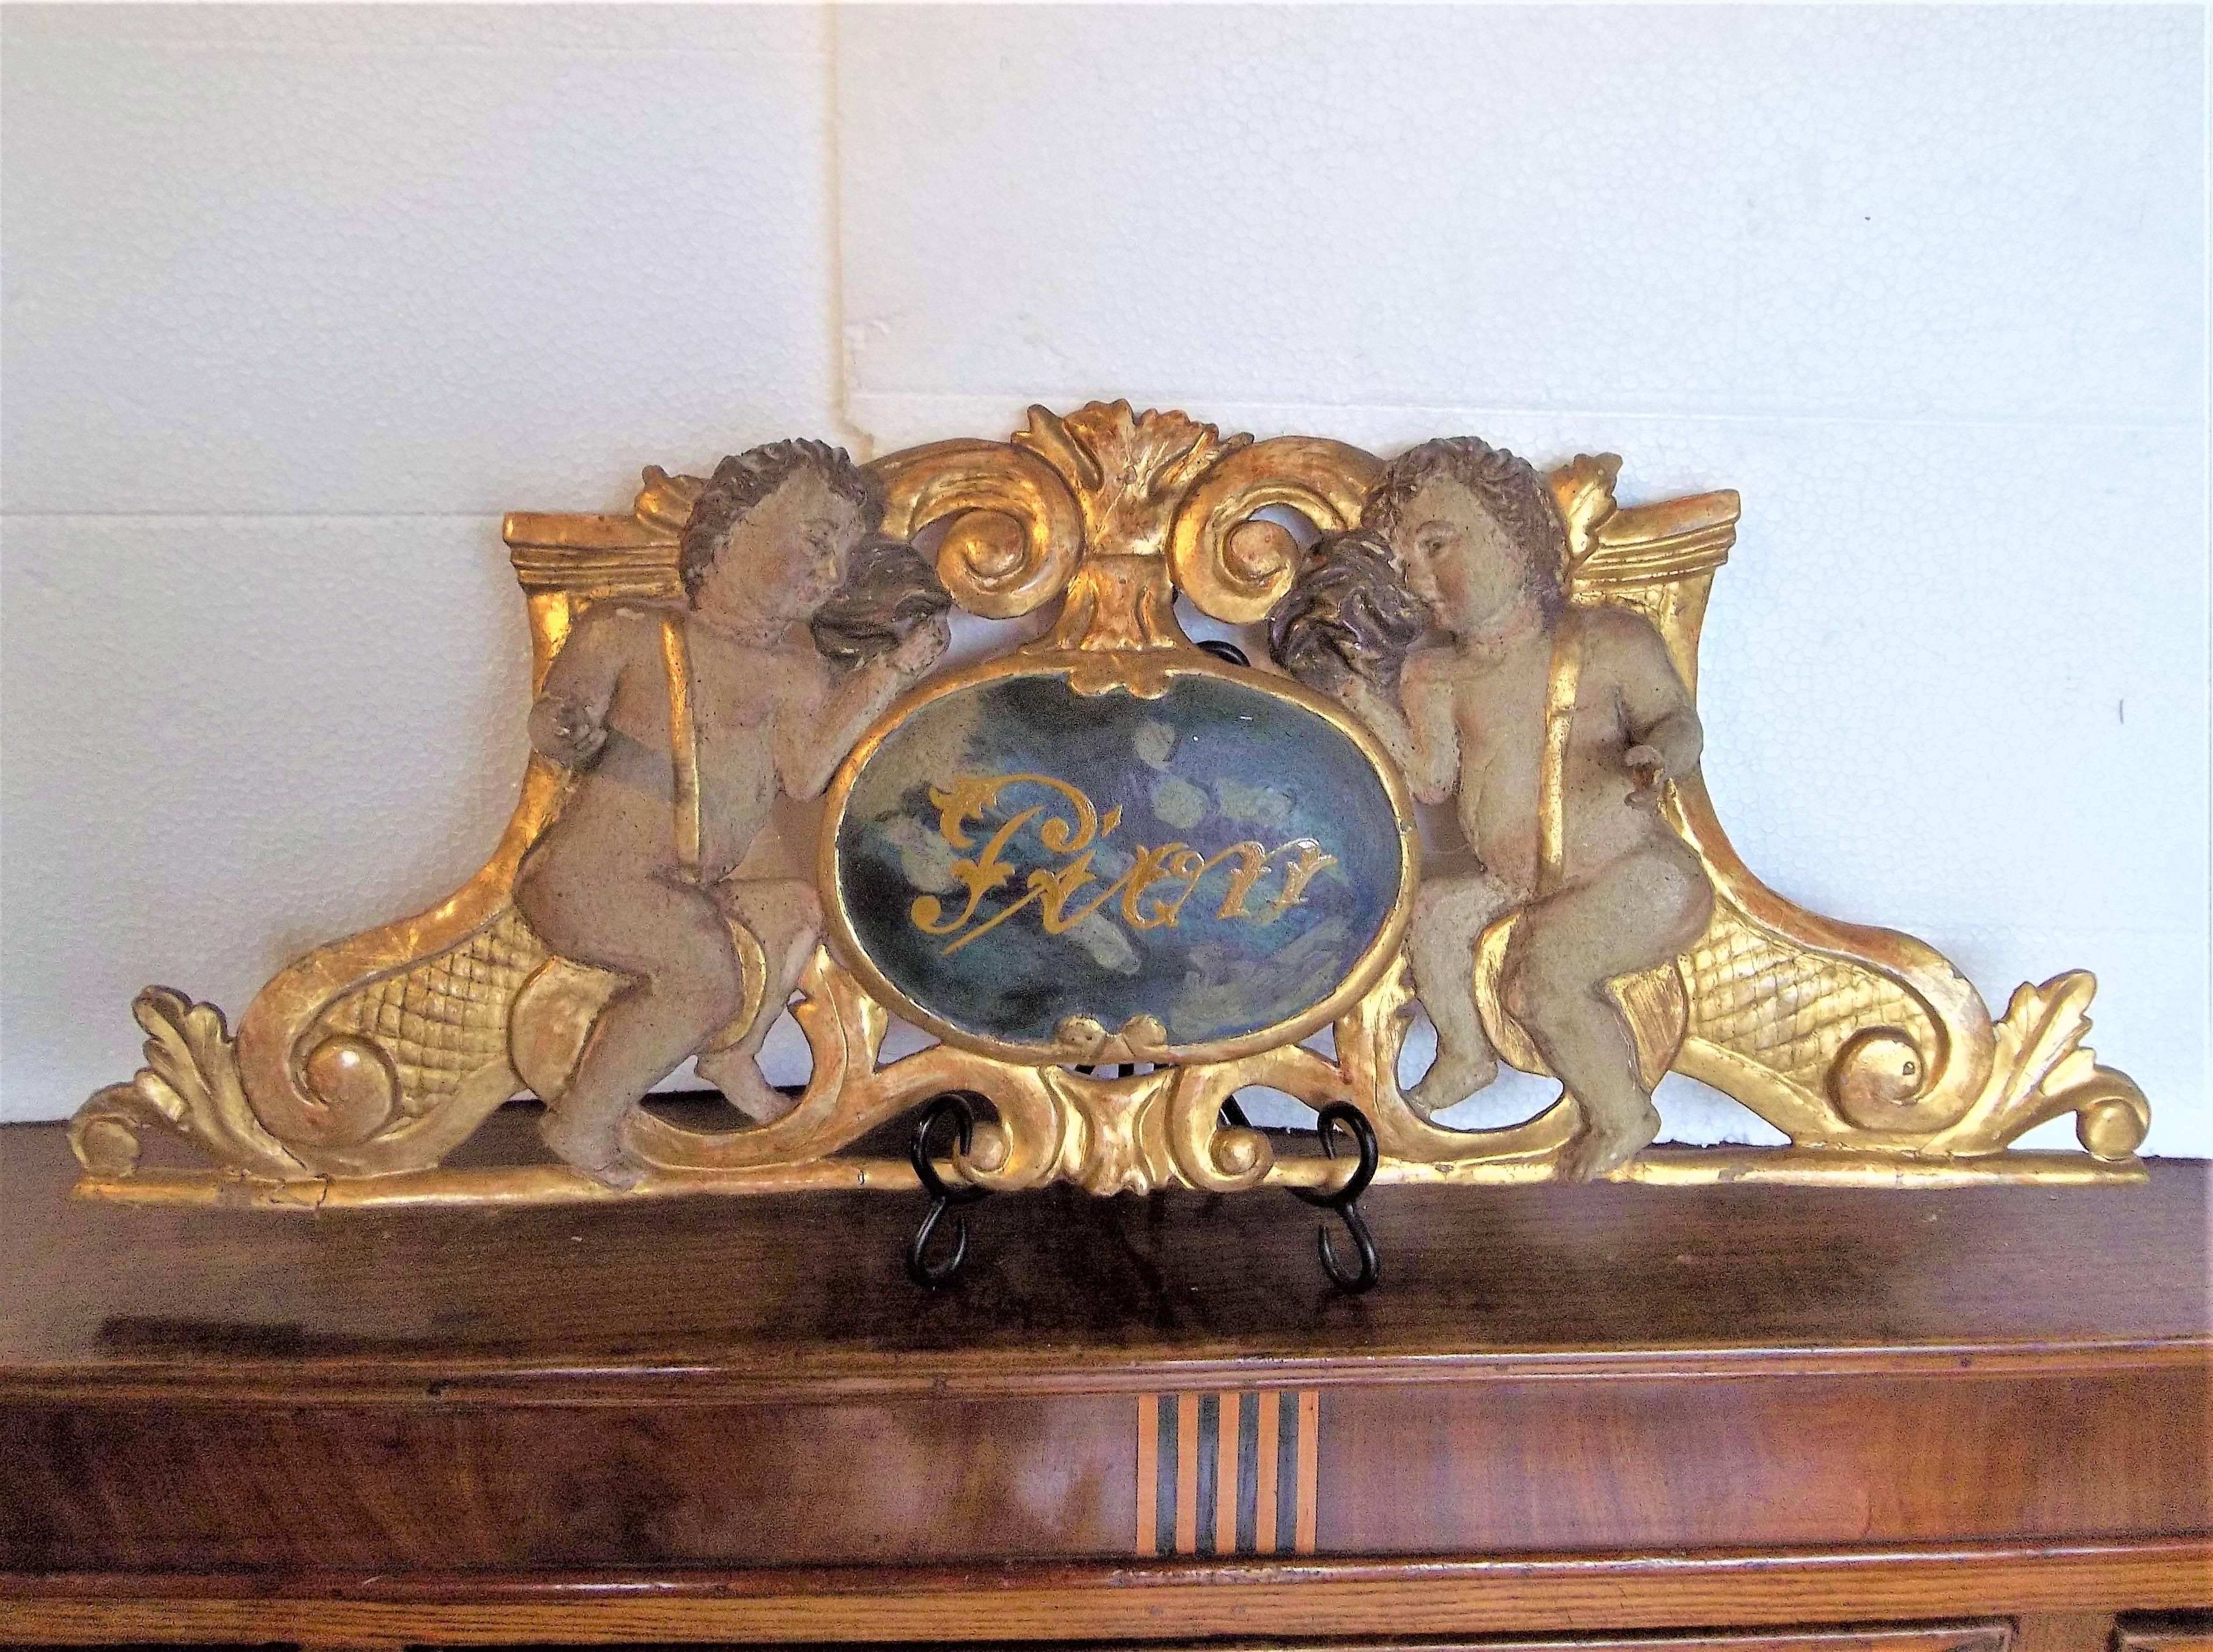 20th Century Giltwood and Painted Overdoor Panel Fragment with Cherub Motif